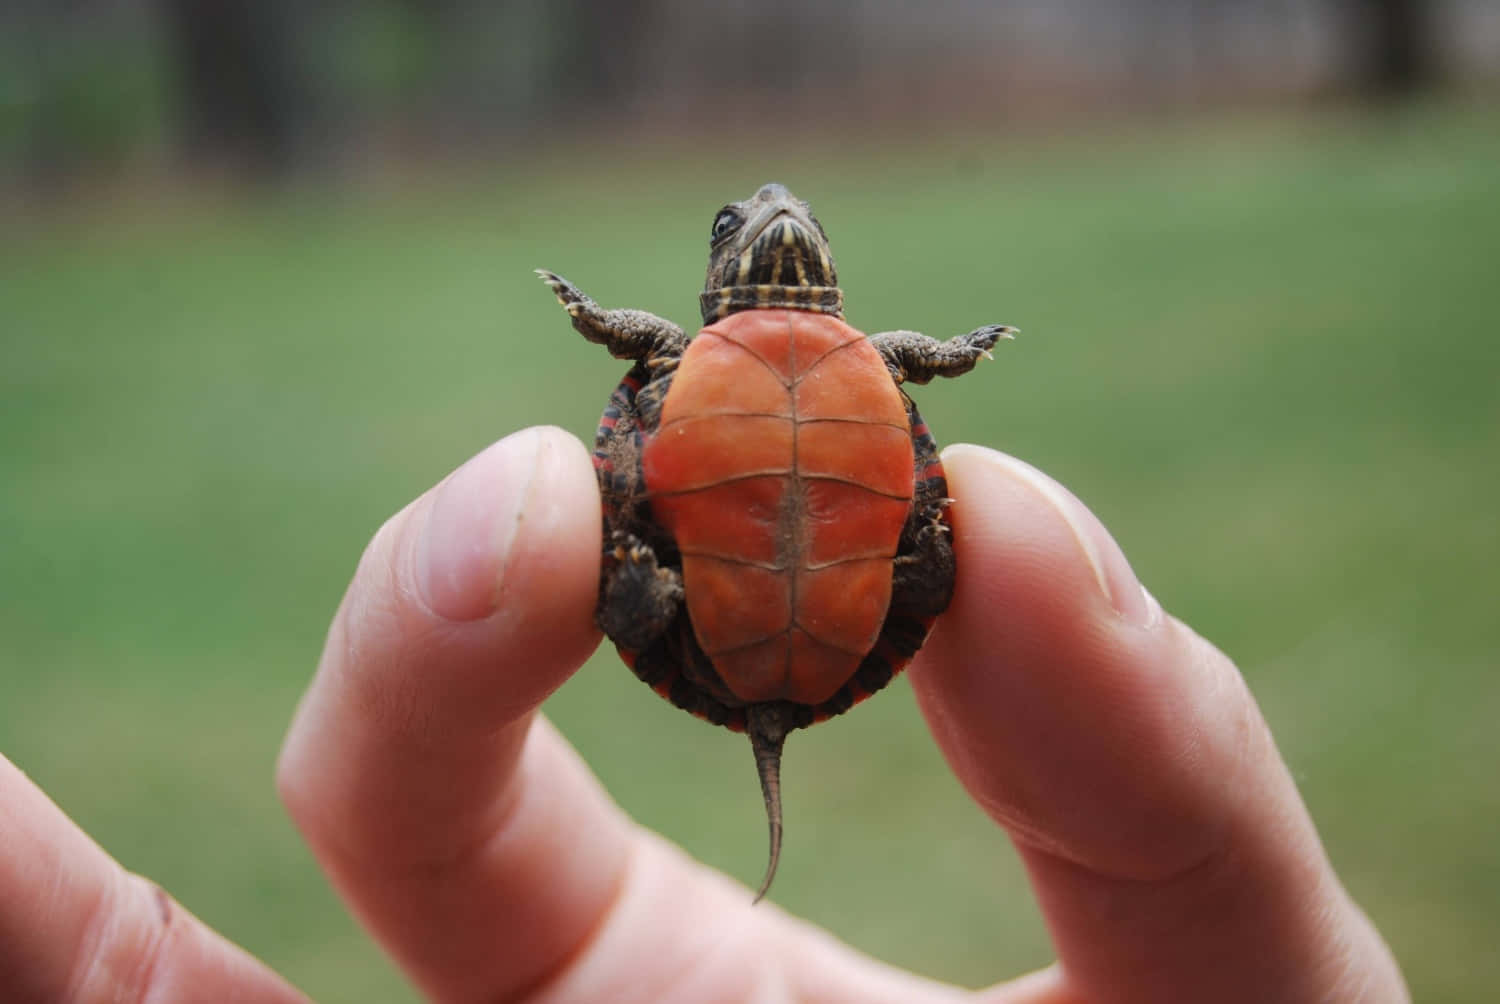 "Life is slow and steady when you're a curious turtle"